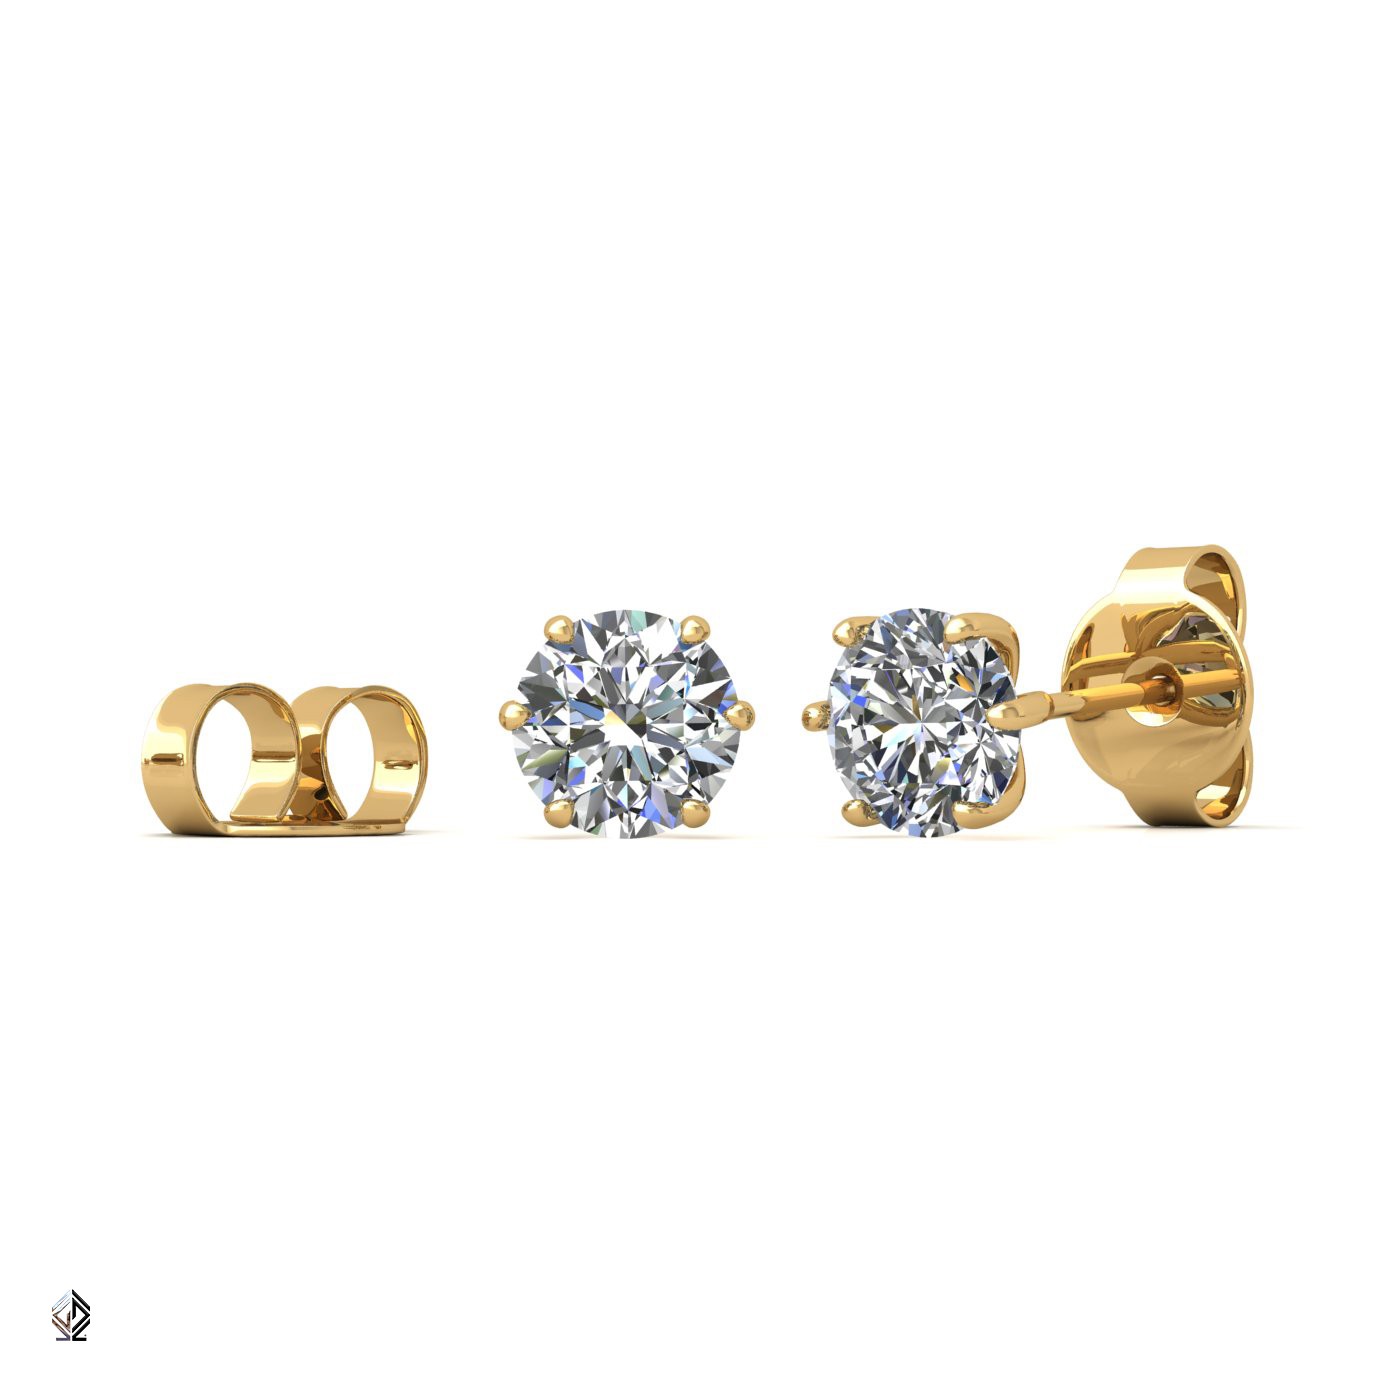 18k yellow gold 0,7 ct each (1,4 tcw) 6 prongs round shape diamond earrings Photos & images